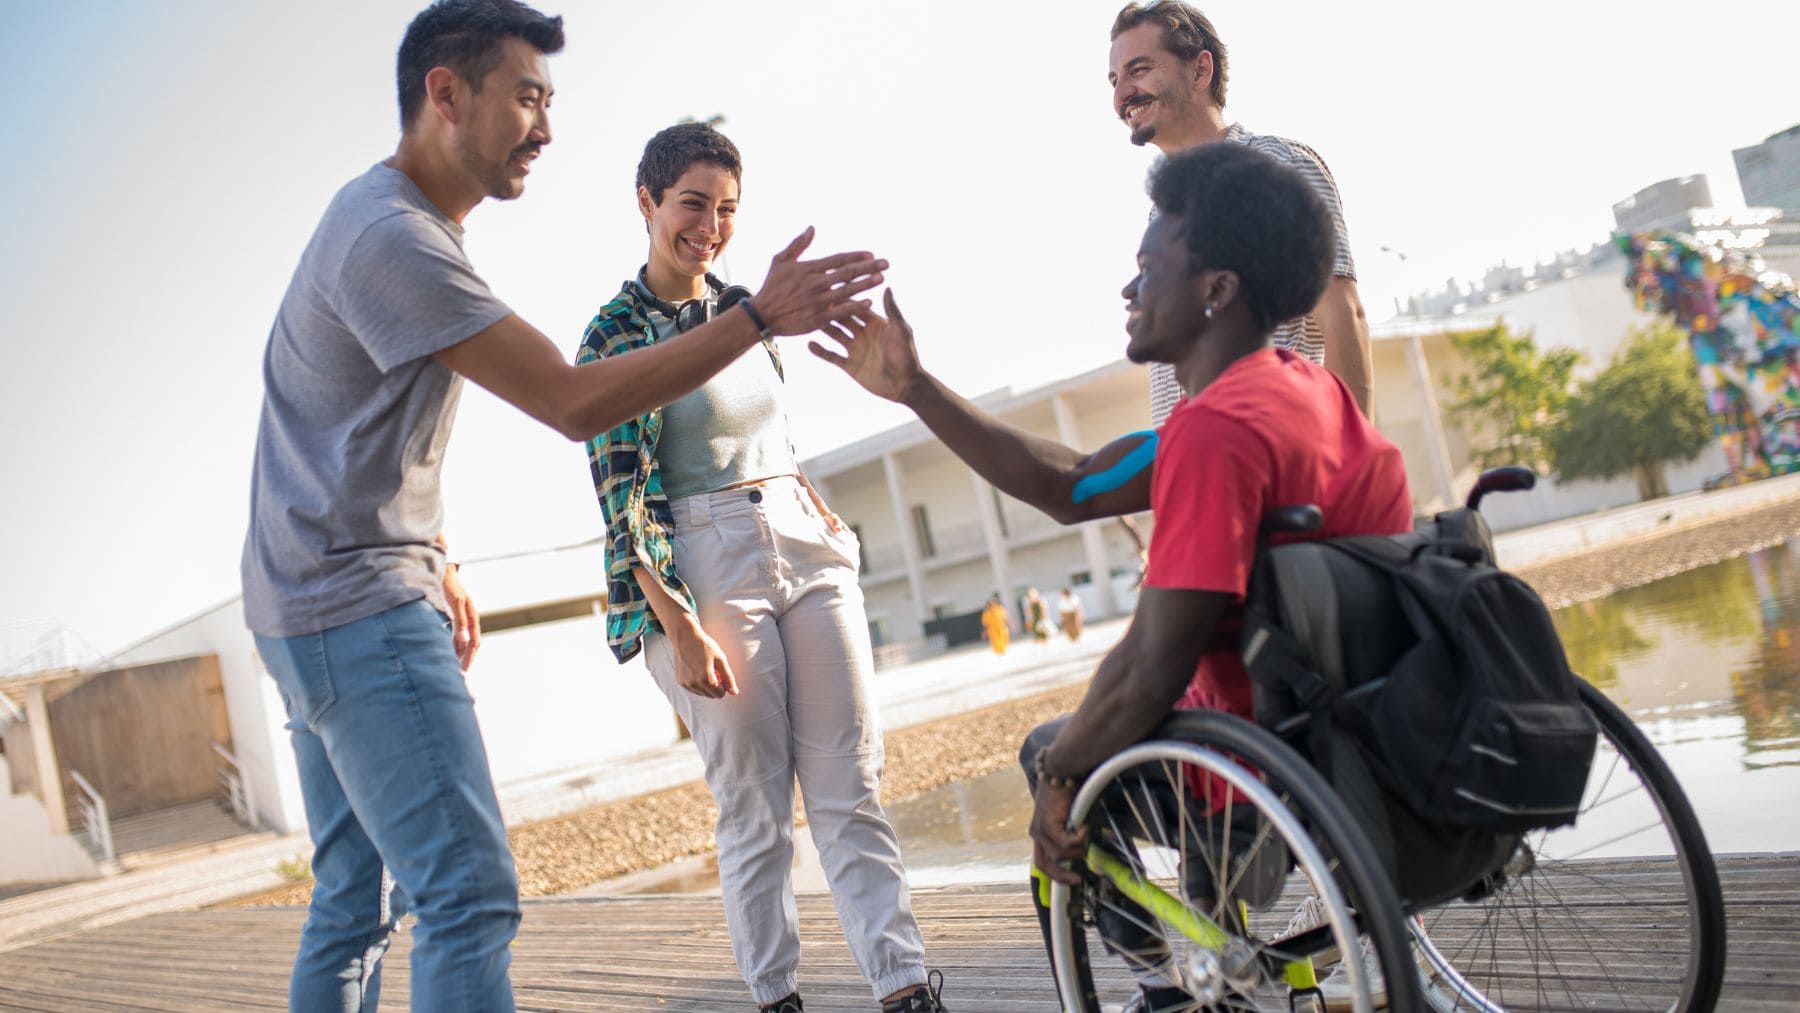 A person with a Disability is saluting a group of people